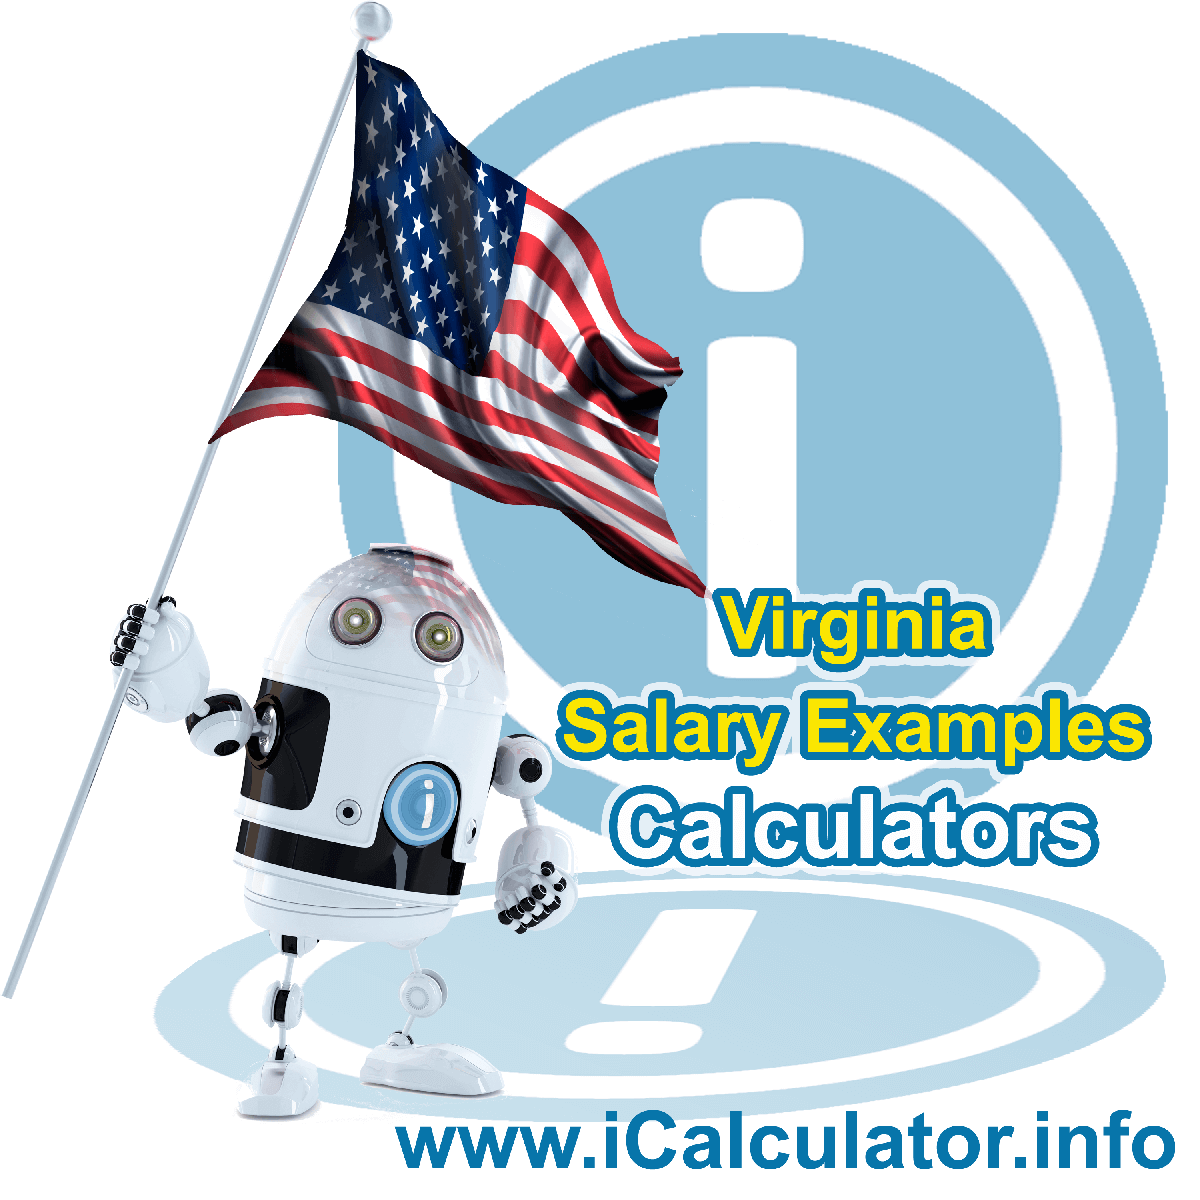 $ 45,000.00 After Tax in Virginia| iCalculator™ | $ 45,000.00 salary after tax example for 2023 tax year in Virginia. Federal and Virginia State income tax plus social security deductions and personal tax exemptions and tax allowances for 2023 